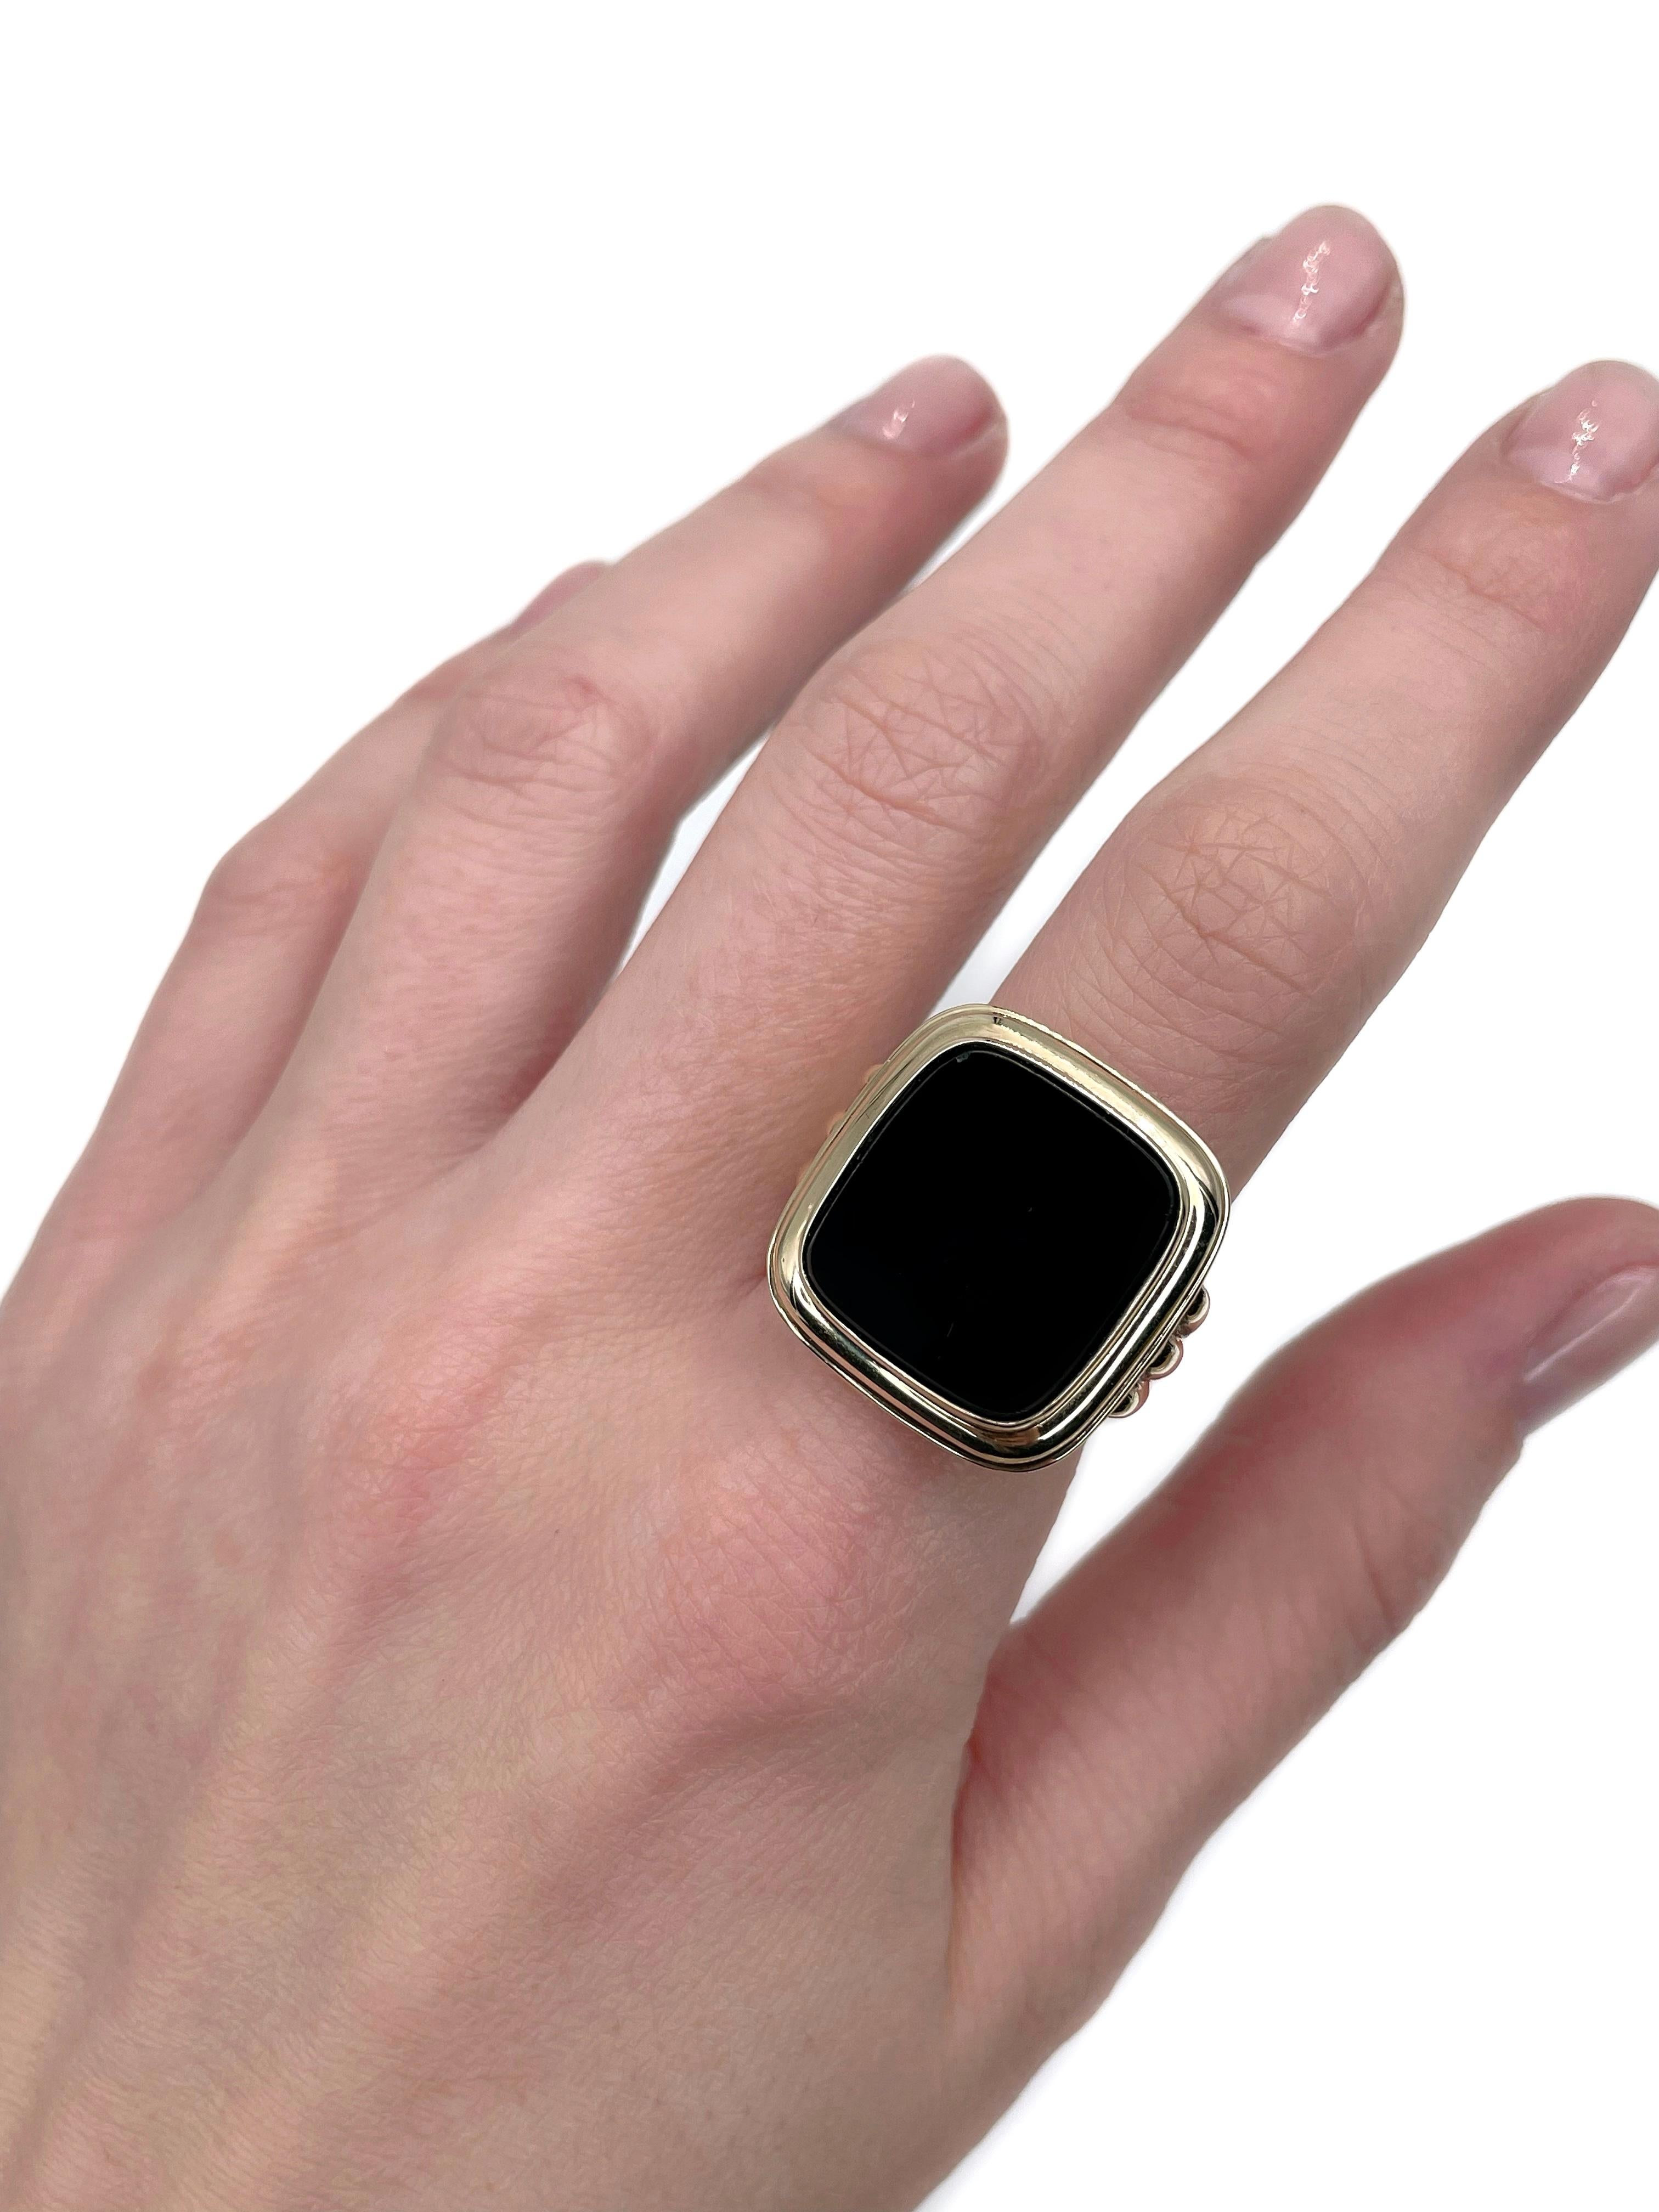 This is a vintage large signet ring crafted in 8K slightly yellow gold. Circa 1980. 

It features rectangle black onyx. 

Signed “333” inside the shank.

Weight: 8.70g
Size: 18.25 (US 8)

IMPORTANT: please ask about the possibility to resize before